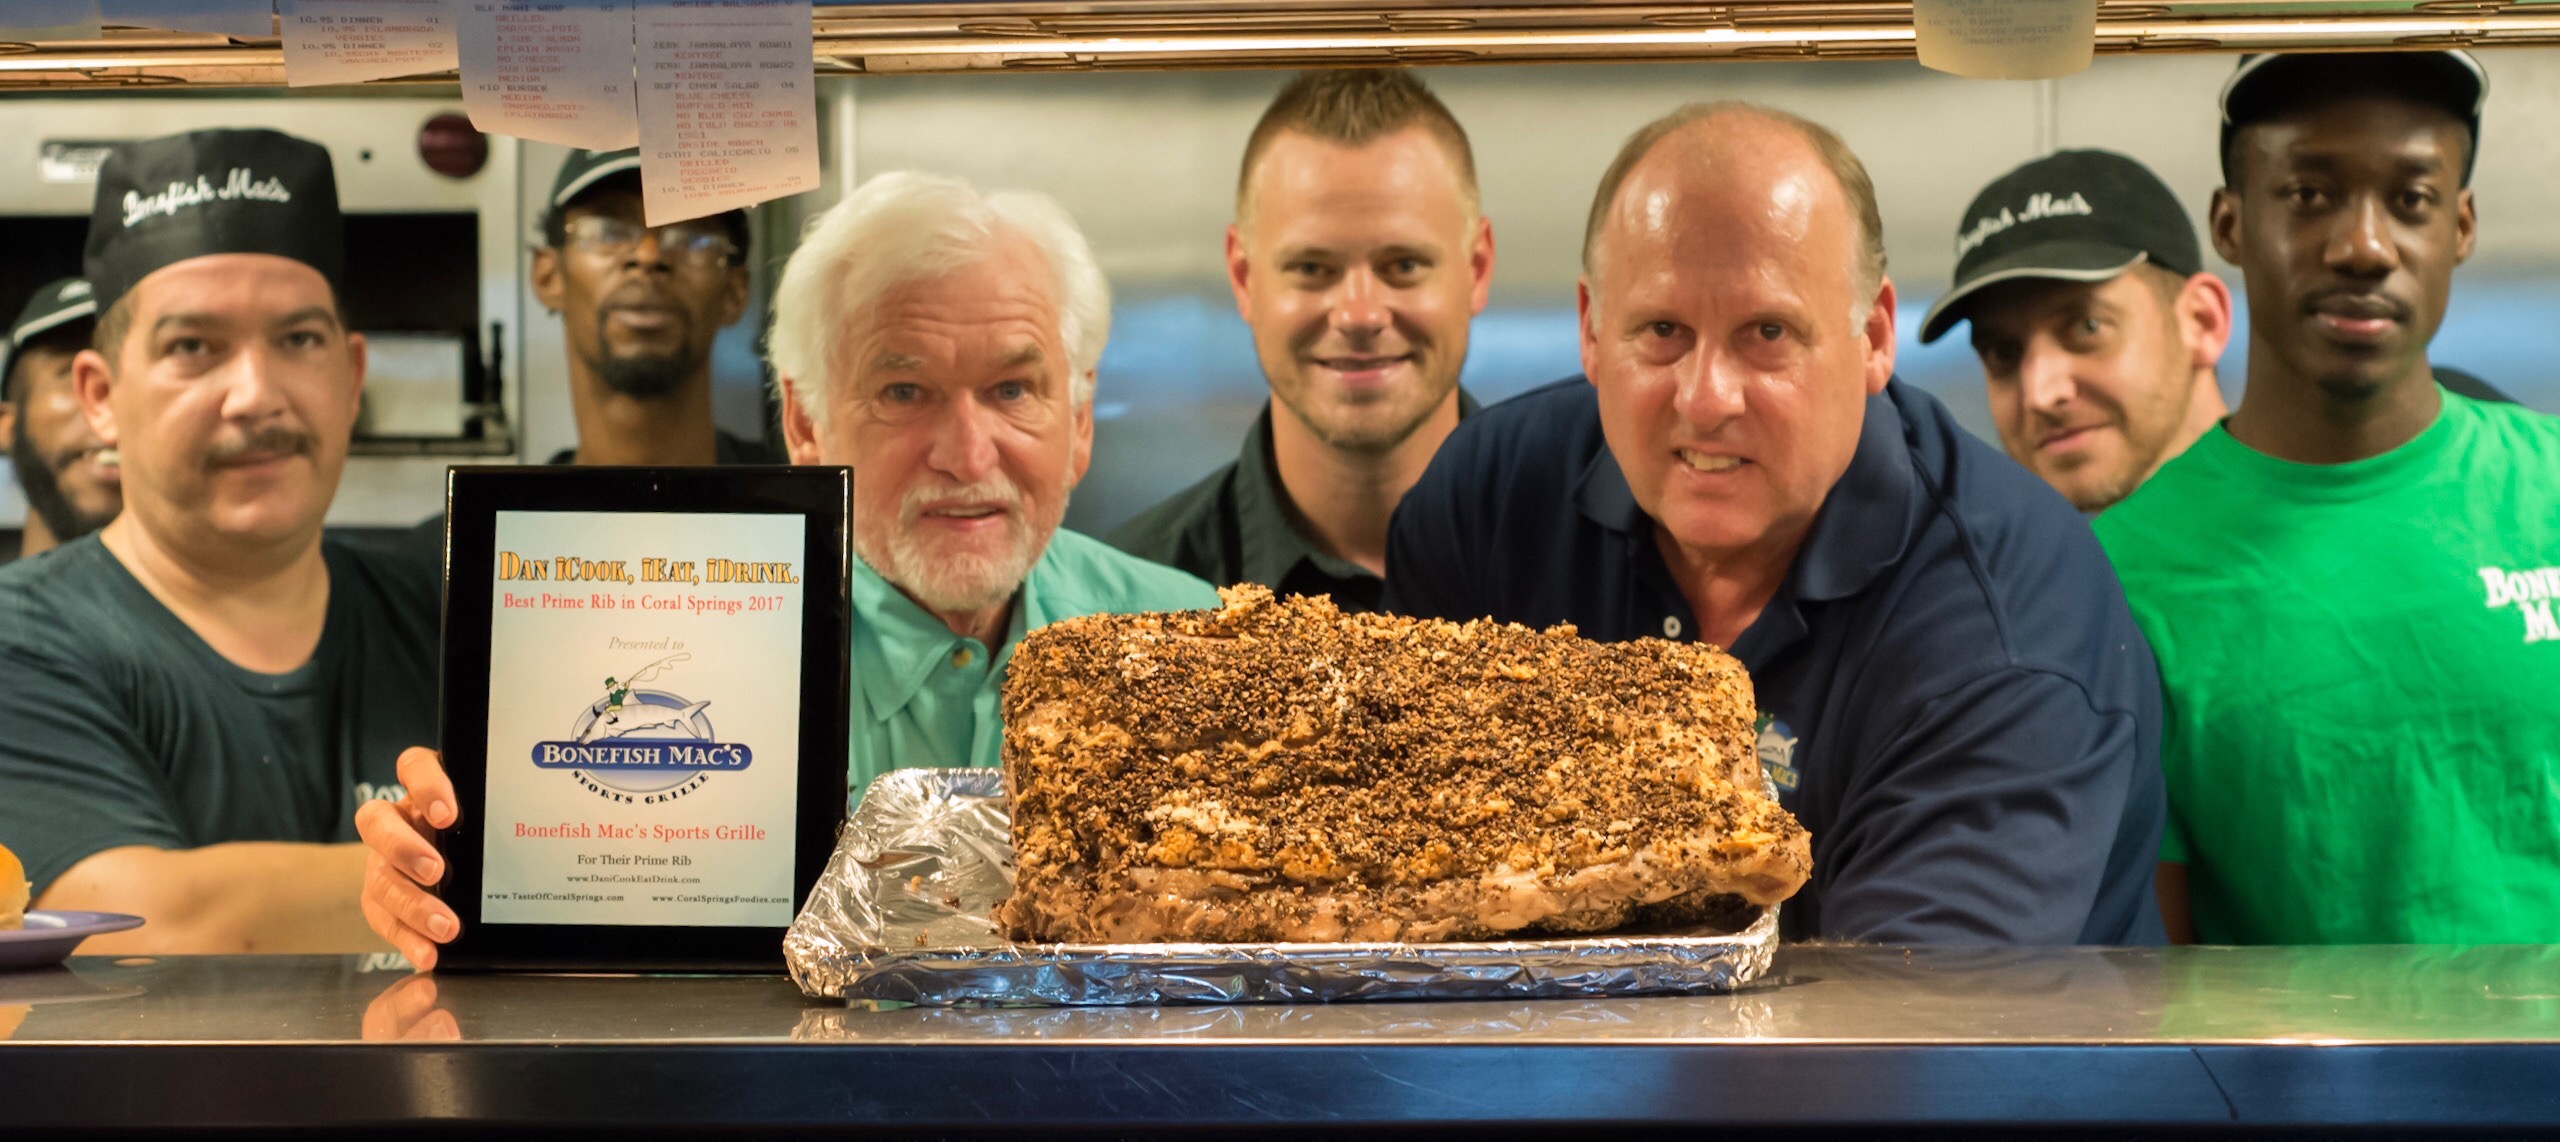 The winning Prime Rib in all its glory! Left to right: Q, Julio, Dawud, owner Chuck, PJ, Bill, James and Carl